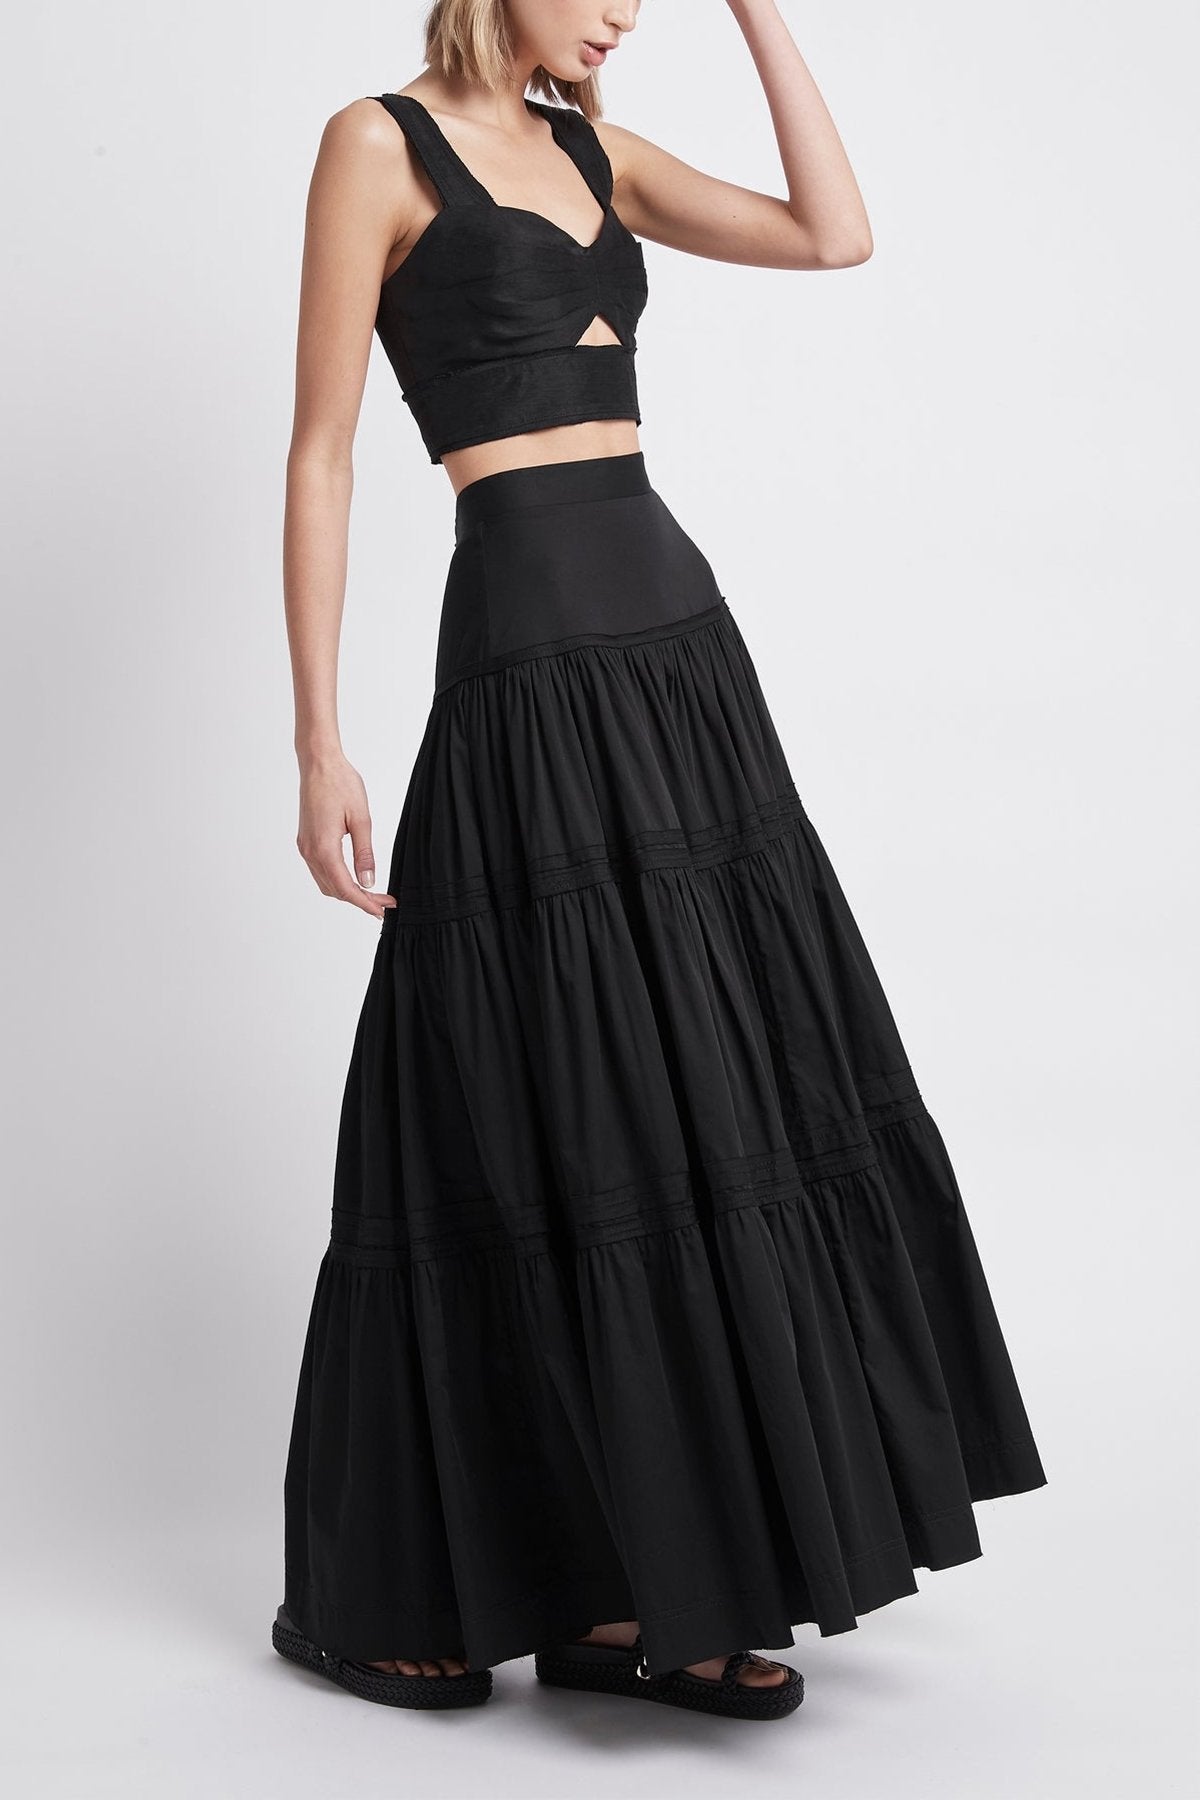 Recurrence Tiered Maxi Skirt in Black - shop-olivia.com